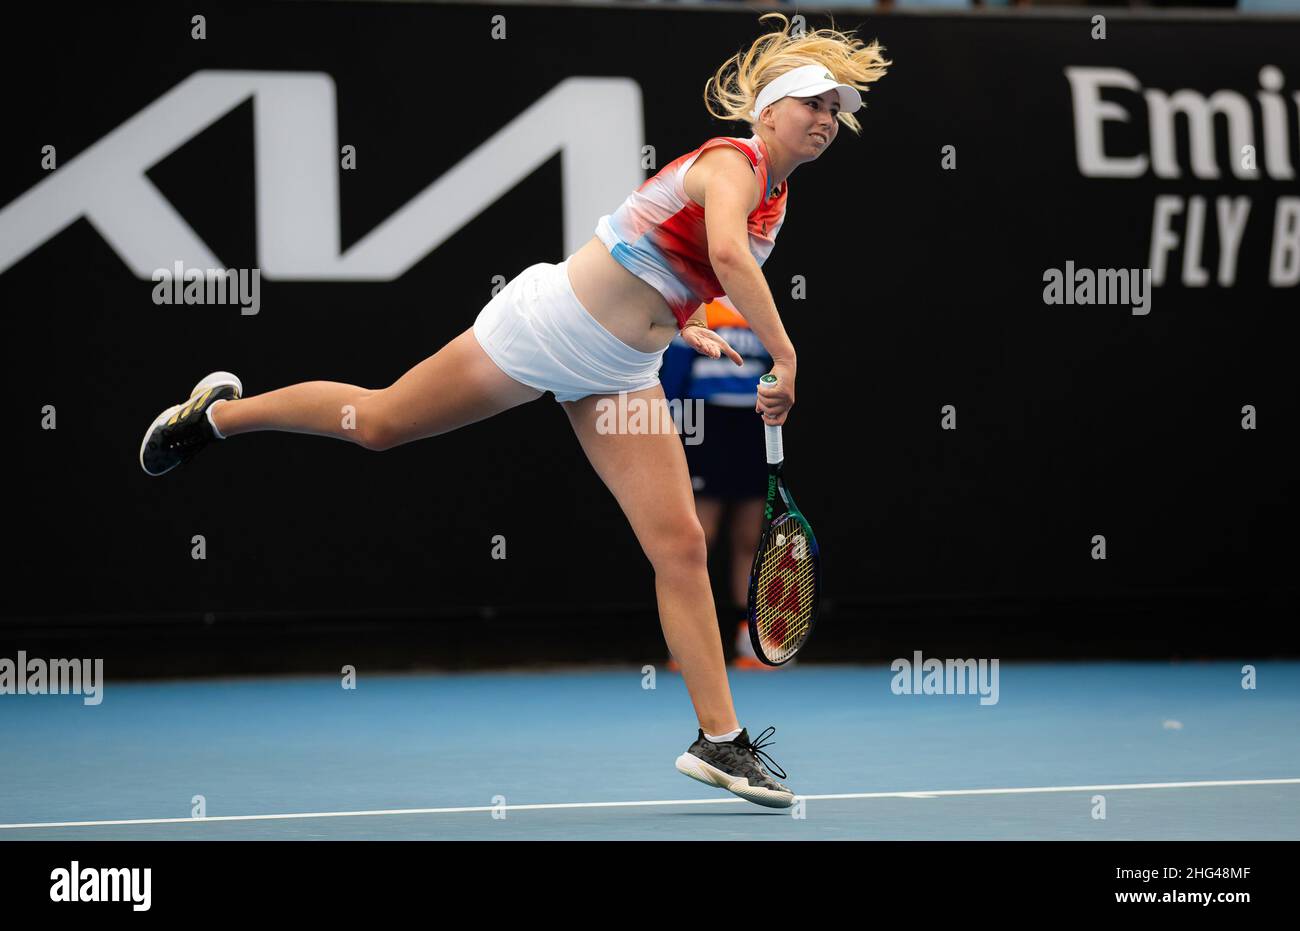 18th January 2022. Clara Tauson of Denmark in action against Astra Sharma  of Australia during the first round of the 2022 Australian Open, WTA Grand  Slam tennis tournament on January 18, 2022